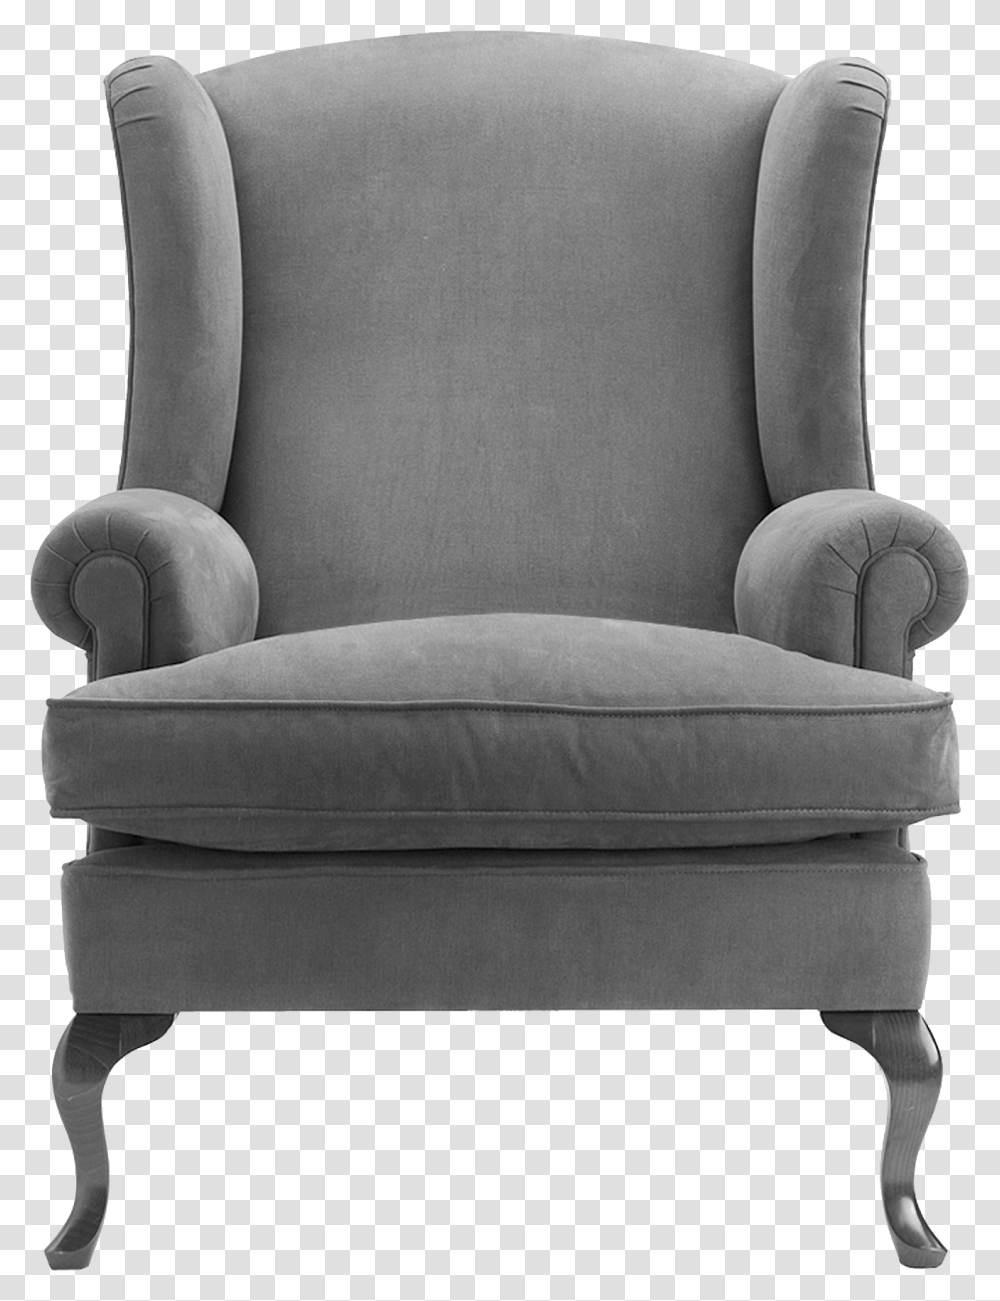 Download Free Armchair Image Armchair, Furniture Transparent Png